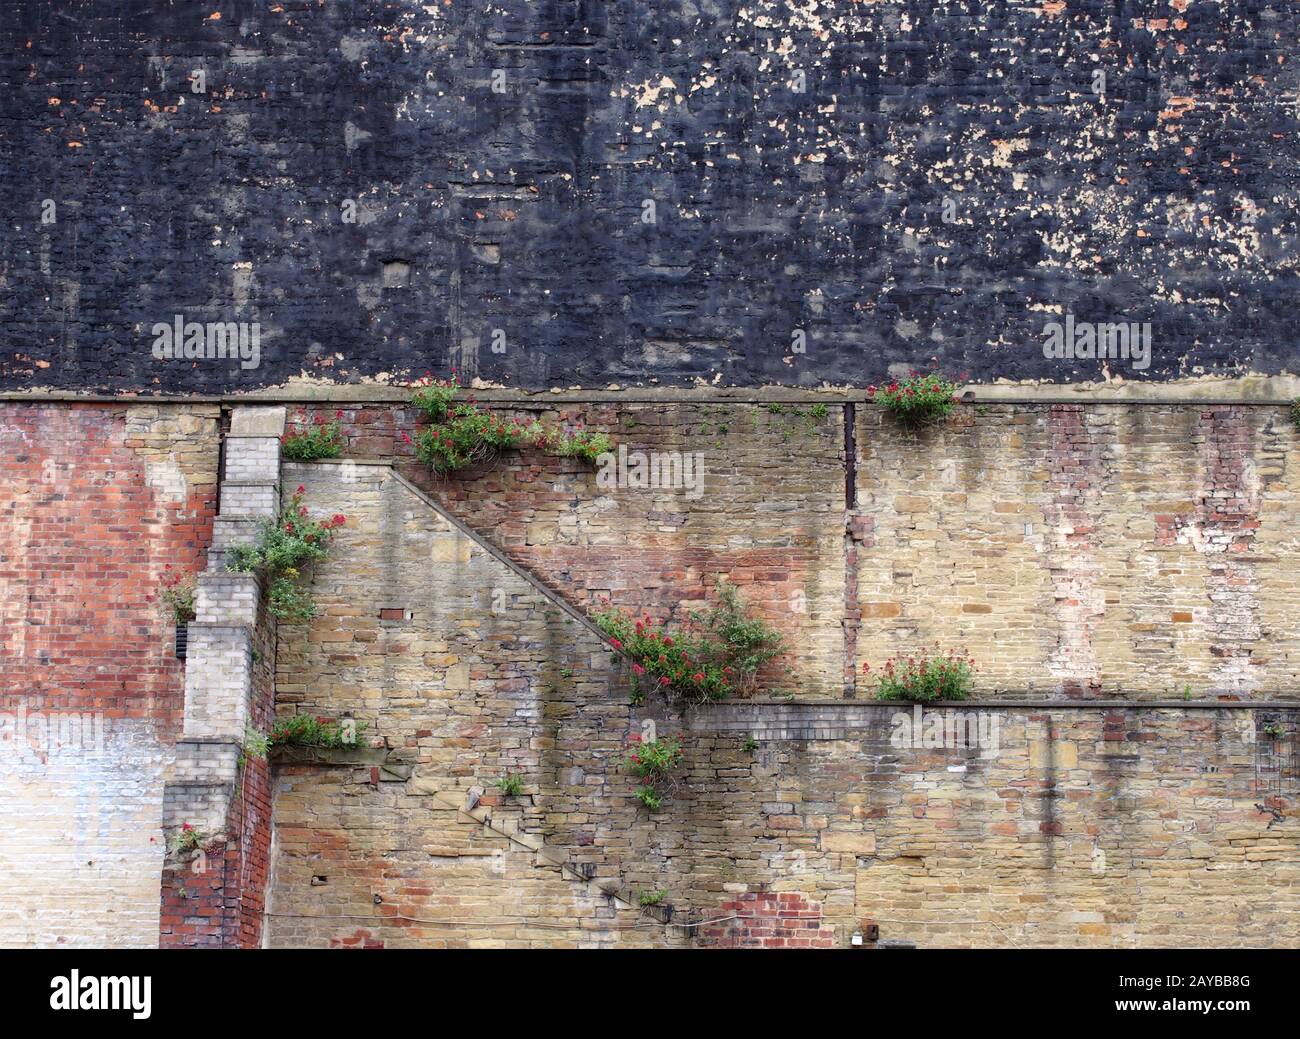 full frame image of a very large old brick wall with many patched and repaired sections stains weeds and black painted area Stock Photo